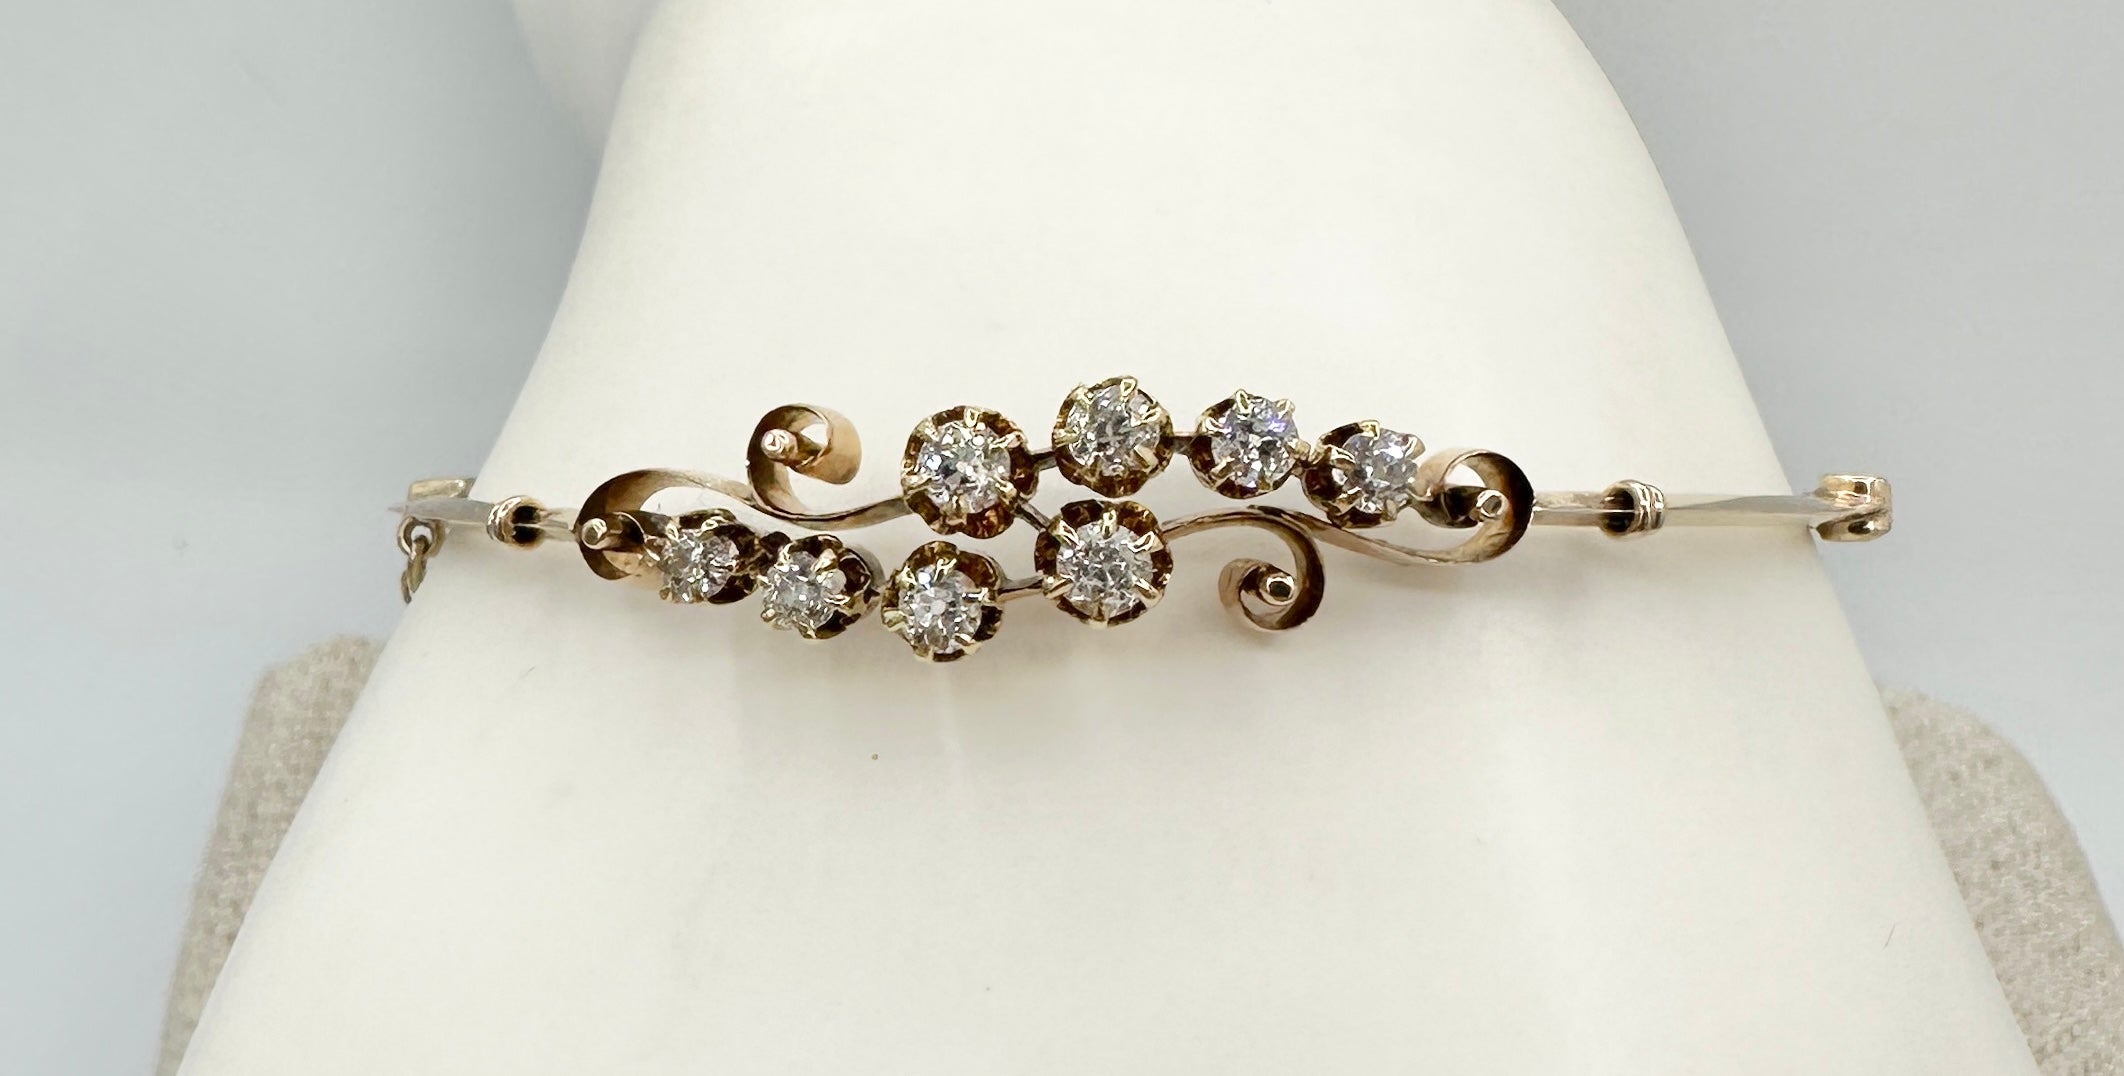 This is a gorgeous antique Victorian - Art Nouveau Bangle Bracelet with eight Old Mine Cut Diamonds in 14 Karat Yellow Gold.  The elegant and classic design is exquisite.  The sparkling white Old MIne Diamonds total approximately .85 Carats.  The